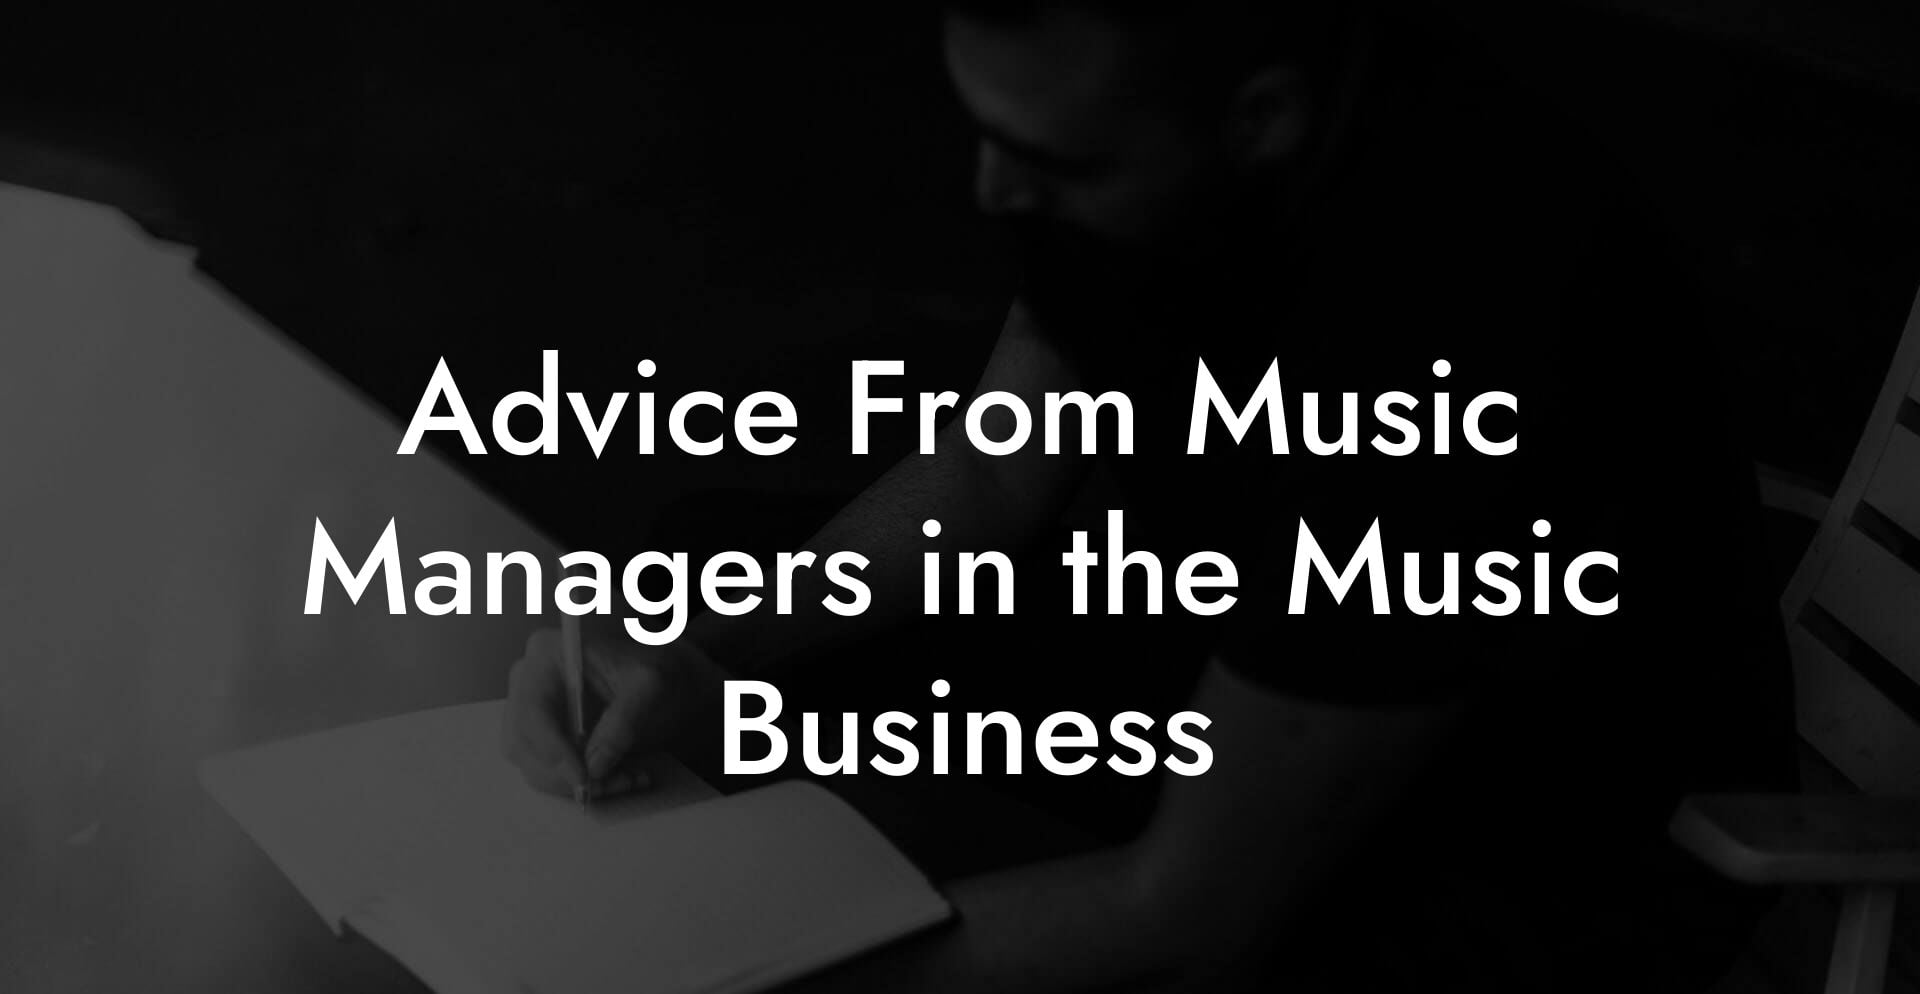 Advice From Music Managers in the Music Business